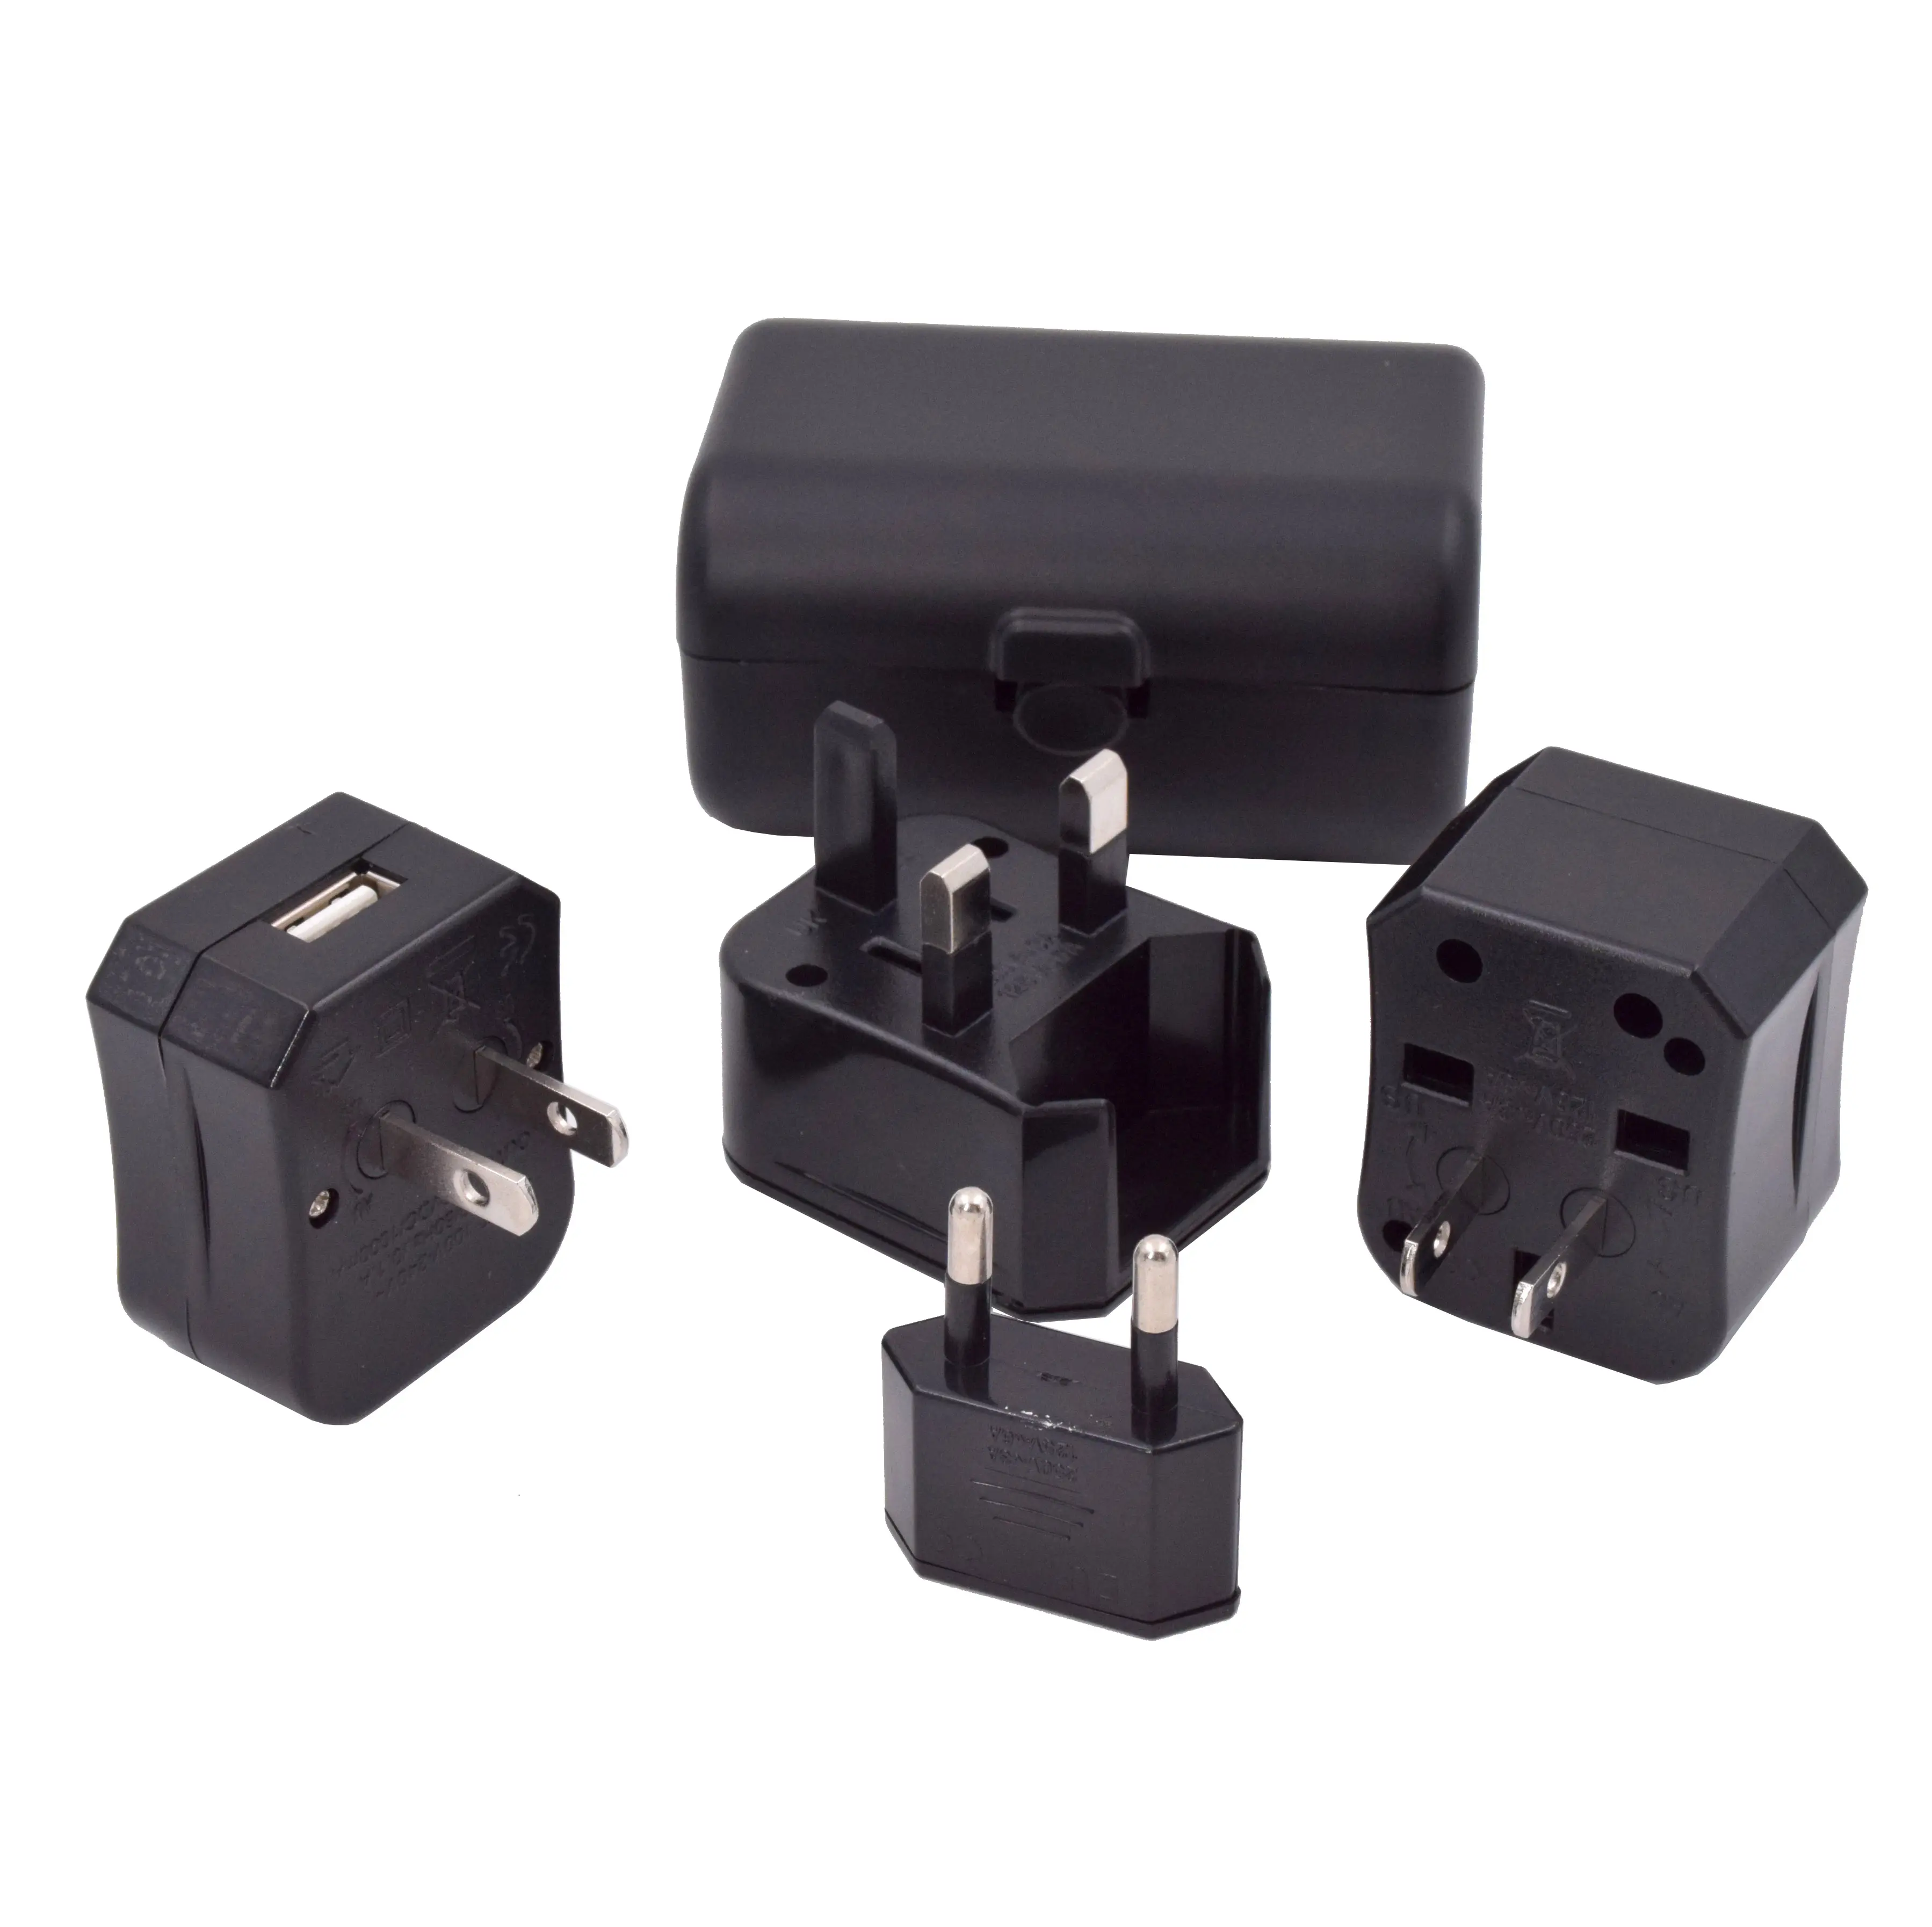 3 In <span class=keywords><strong>1</strong></span> Travel <span class=keywords><strong>Adapter</strong></span> Met Case Universal Travel <span class=keywords><strong>Adapter</strong></span> Met Usb